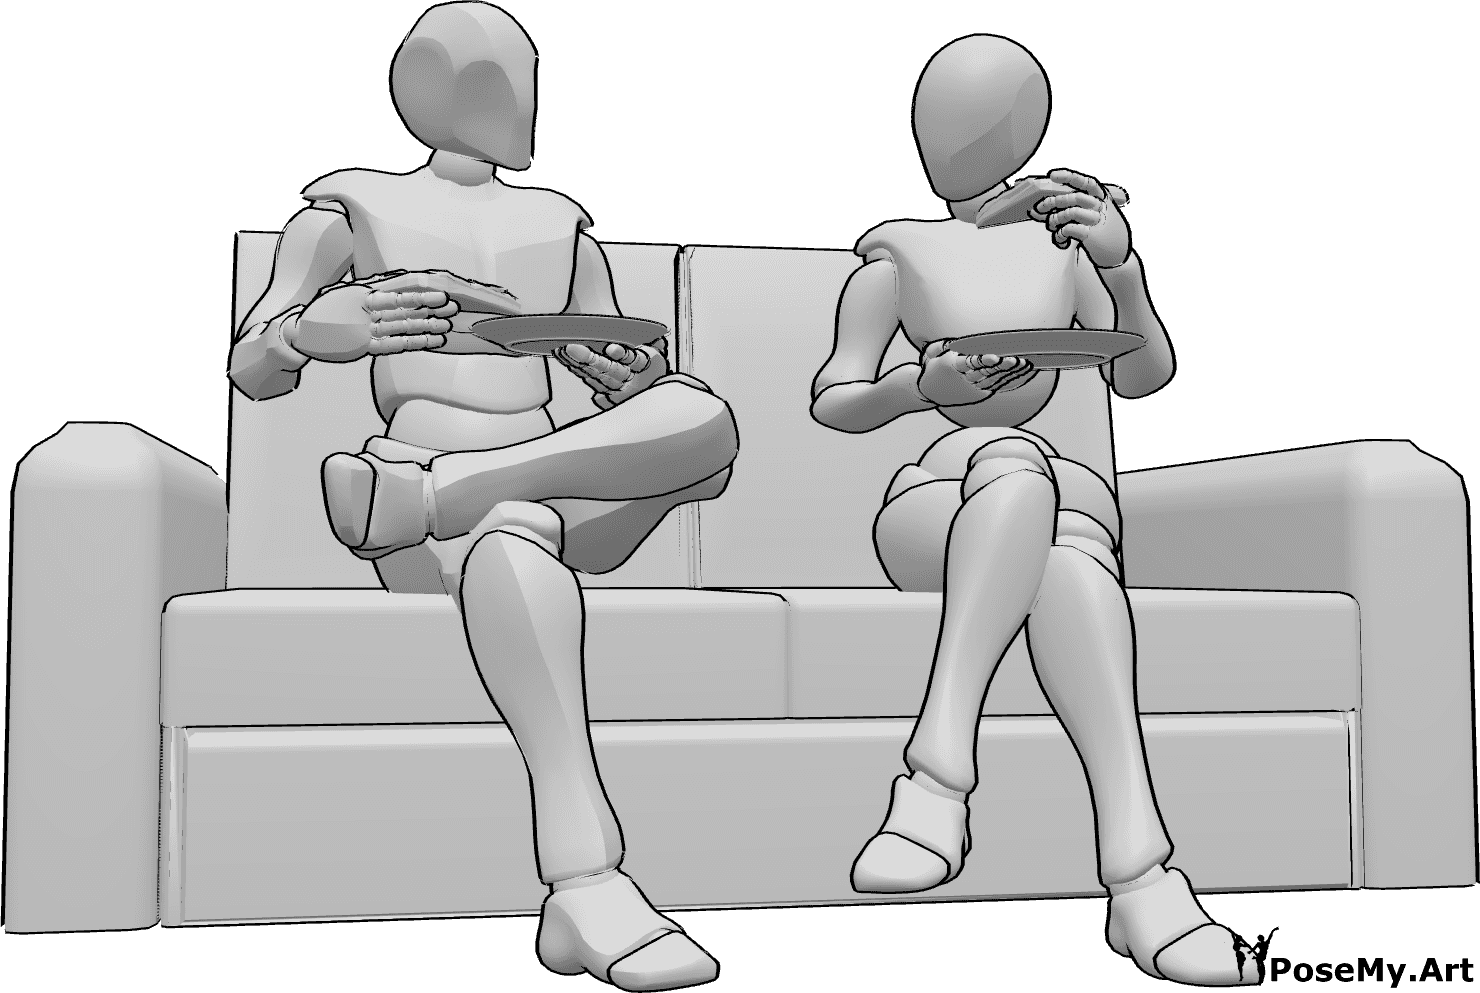 Pose Reference- Sitting eating pizza pose - Female and male are sitting on the couch and eating pizza, holding plates and pizza slices